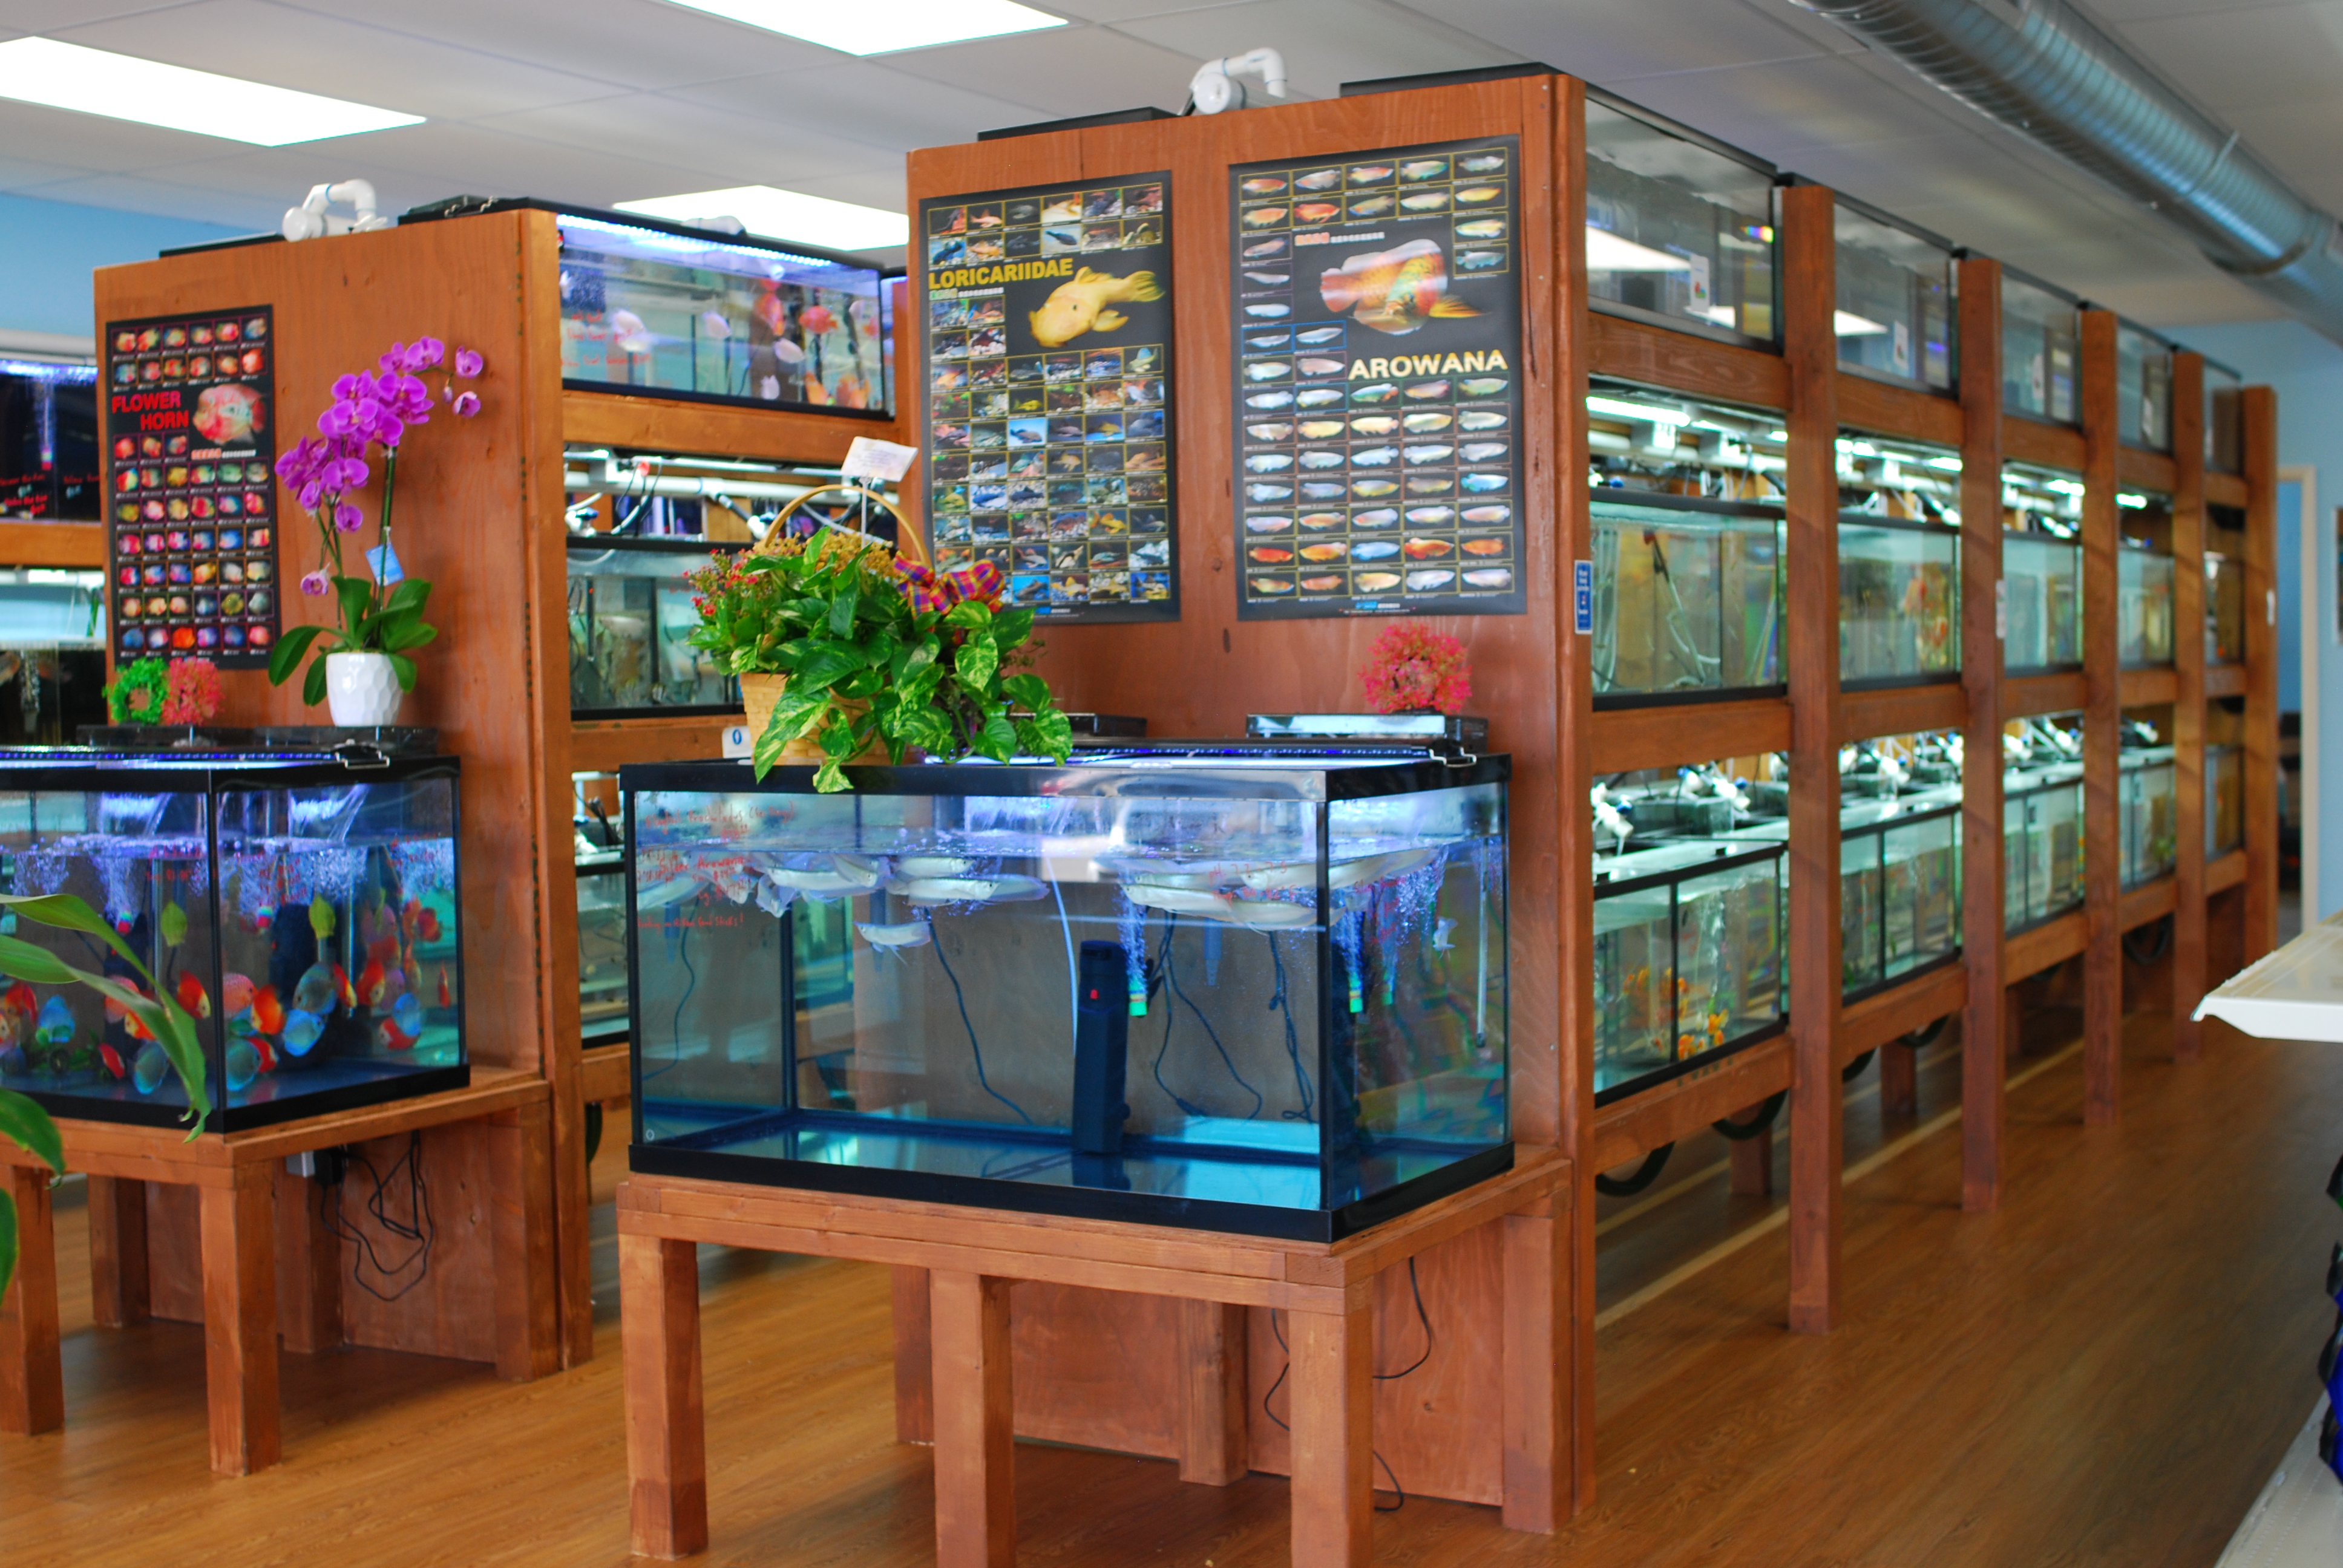 Official Grand-Opening For Pet Zone Tropical Fish in Kearny Mesa Coming